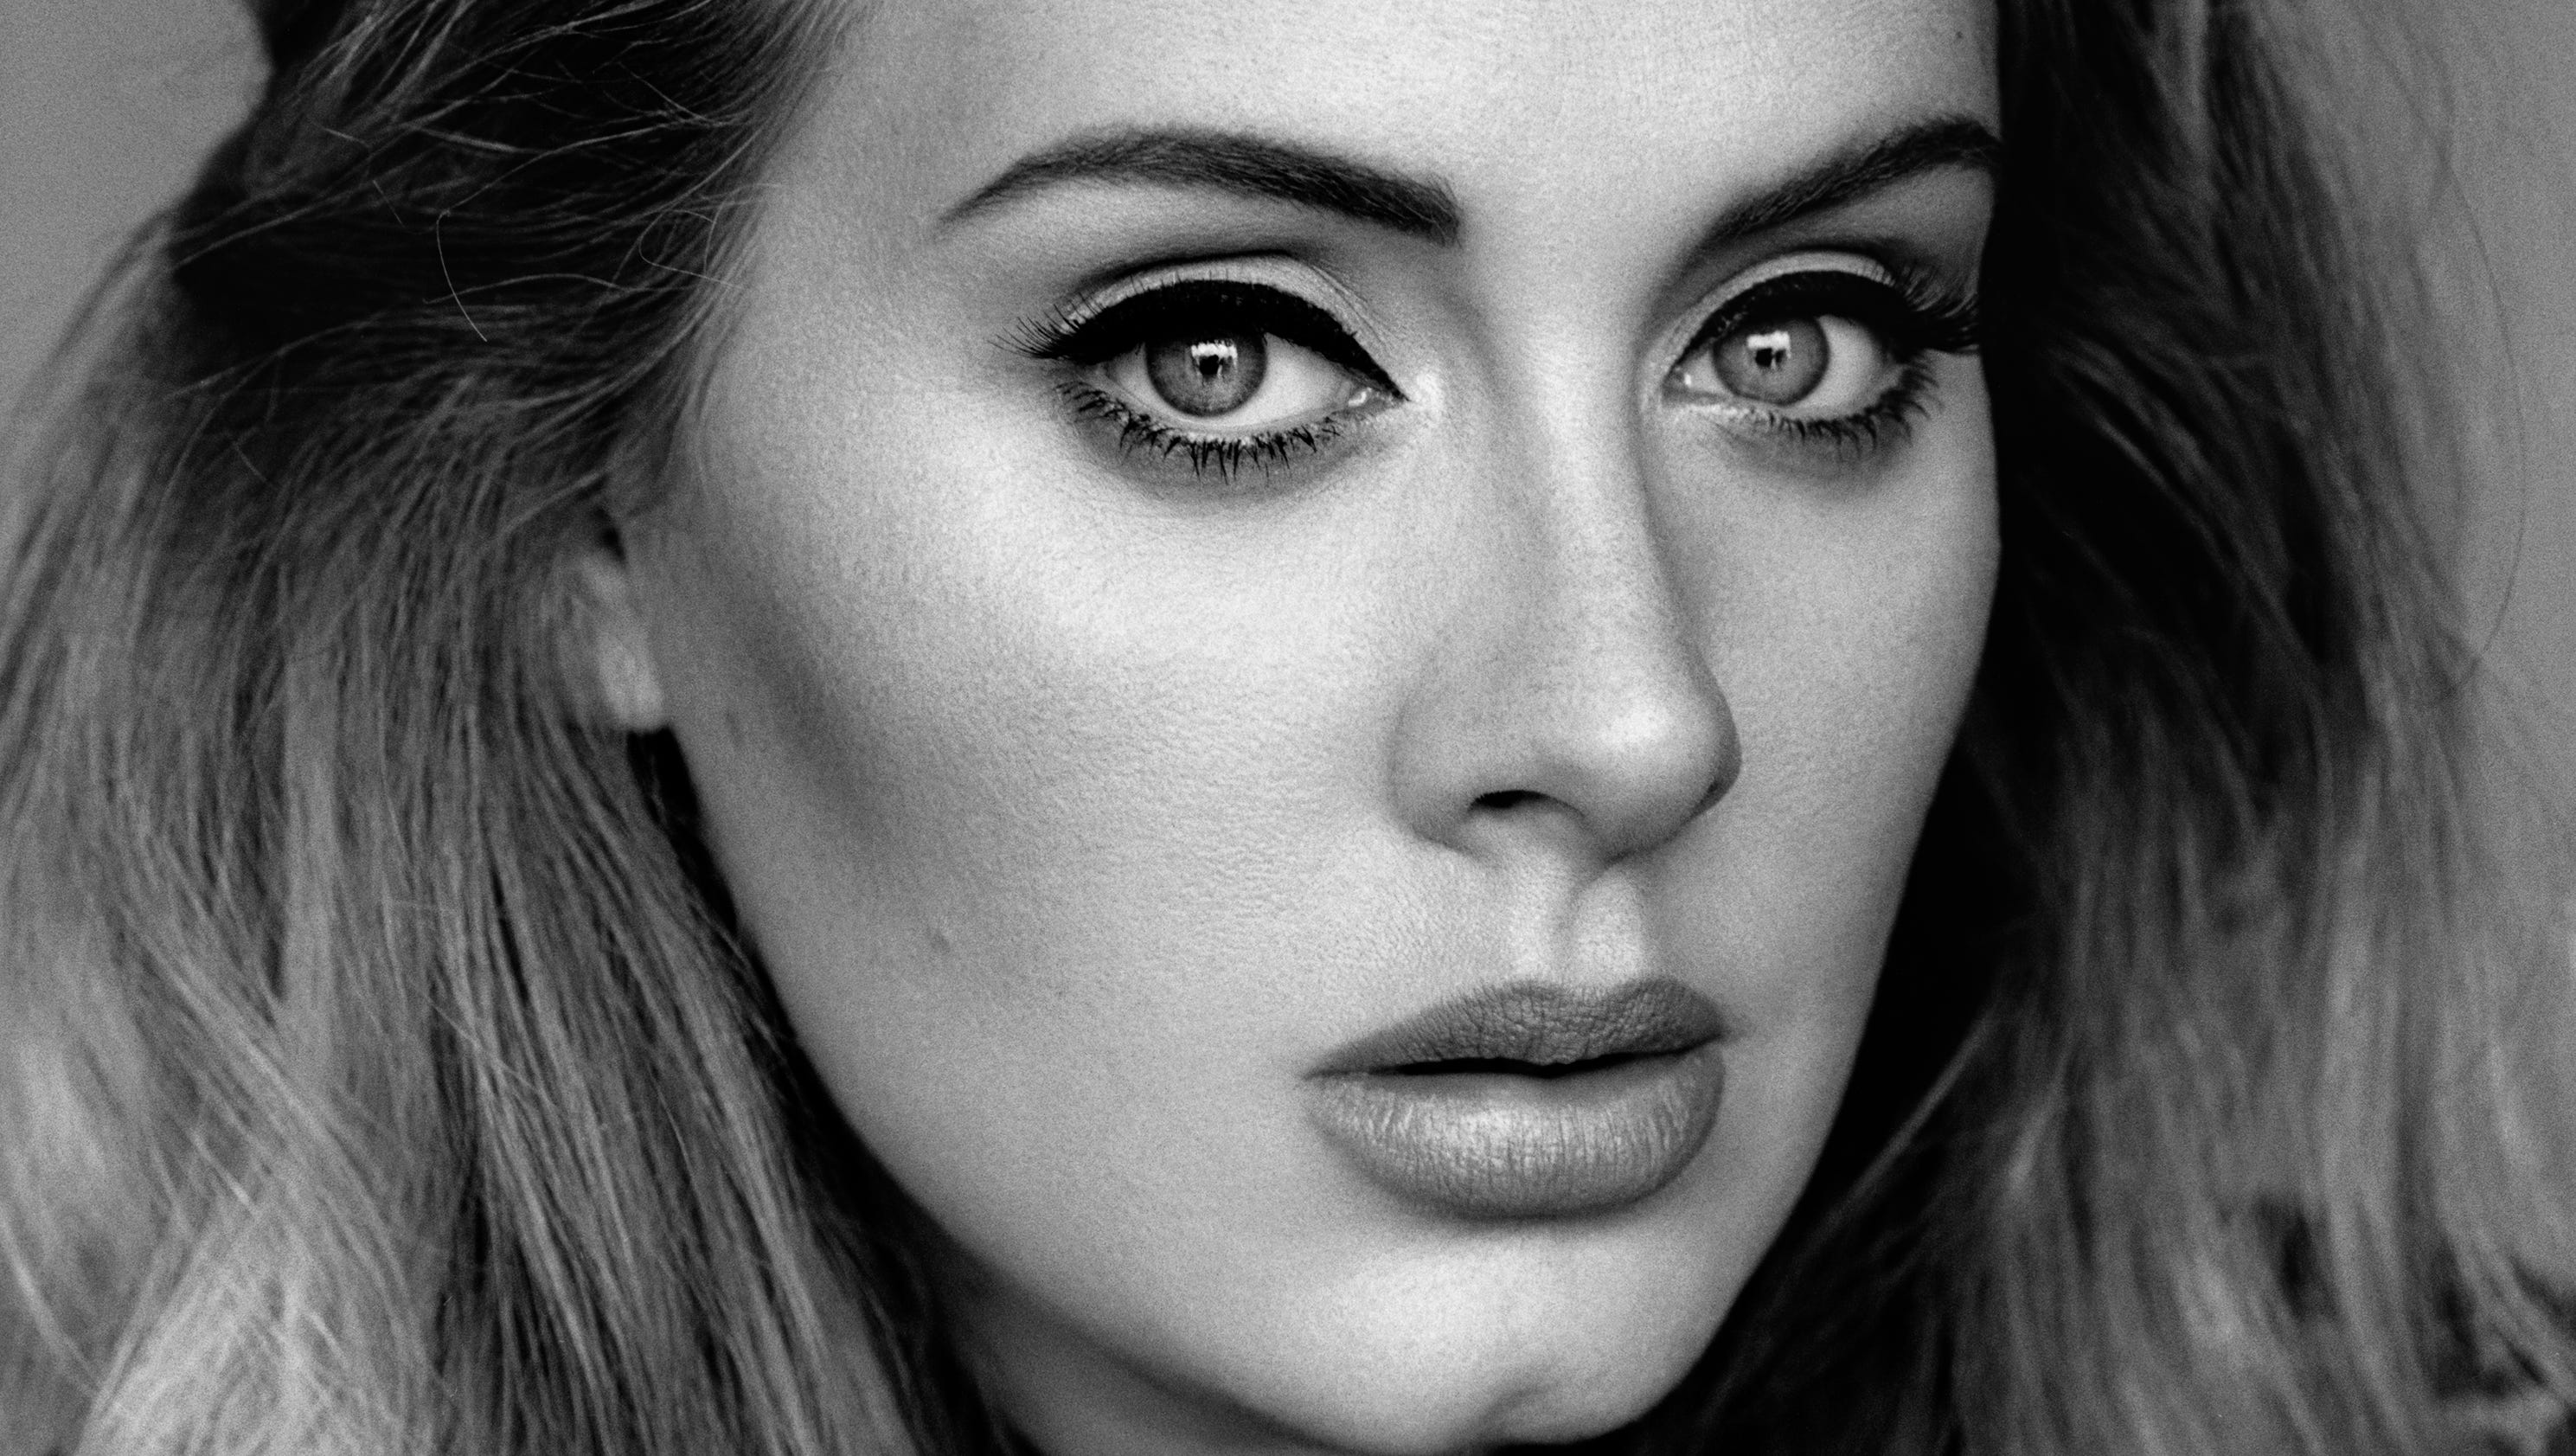 Adele channeled her 'early-life crisis' into long-awaited new album, '25'